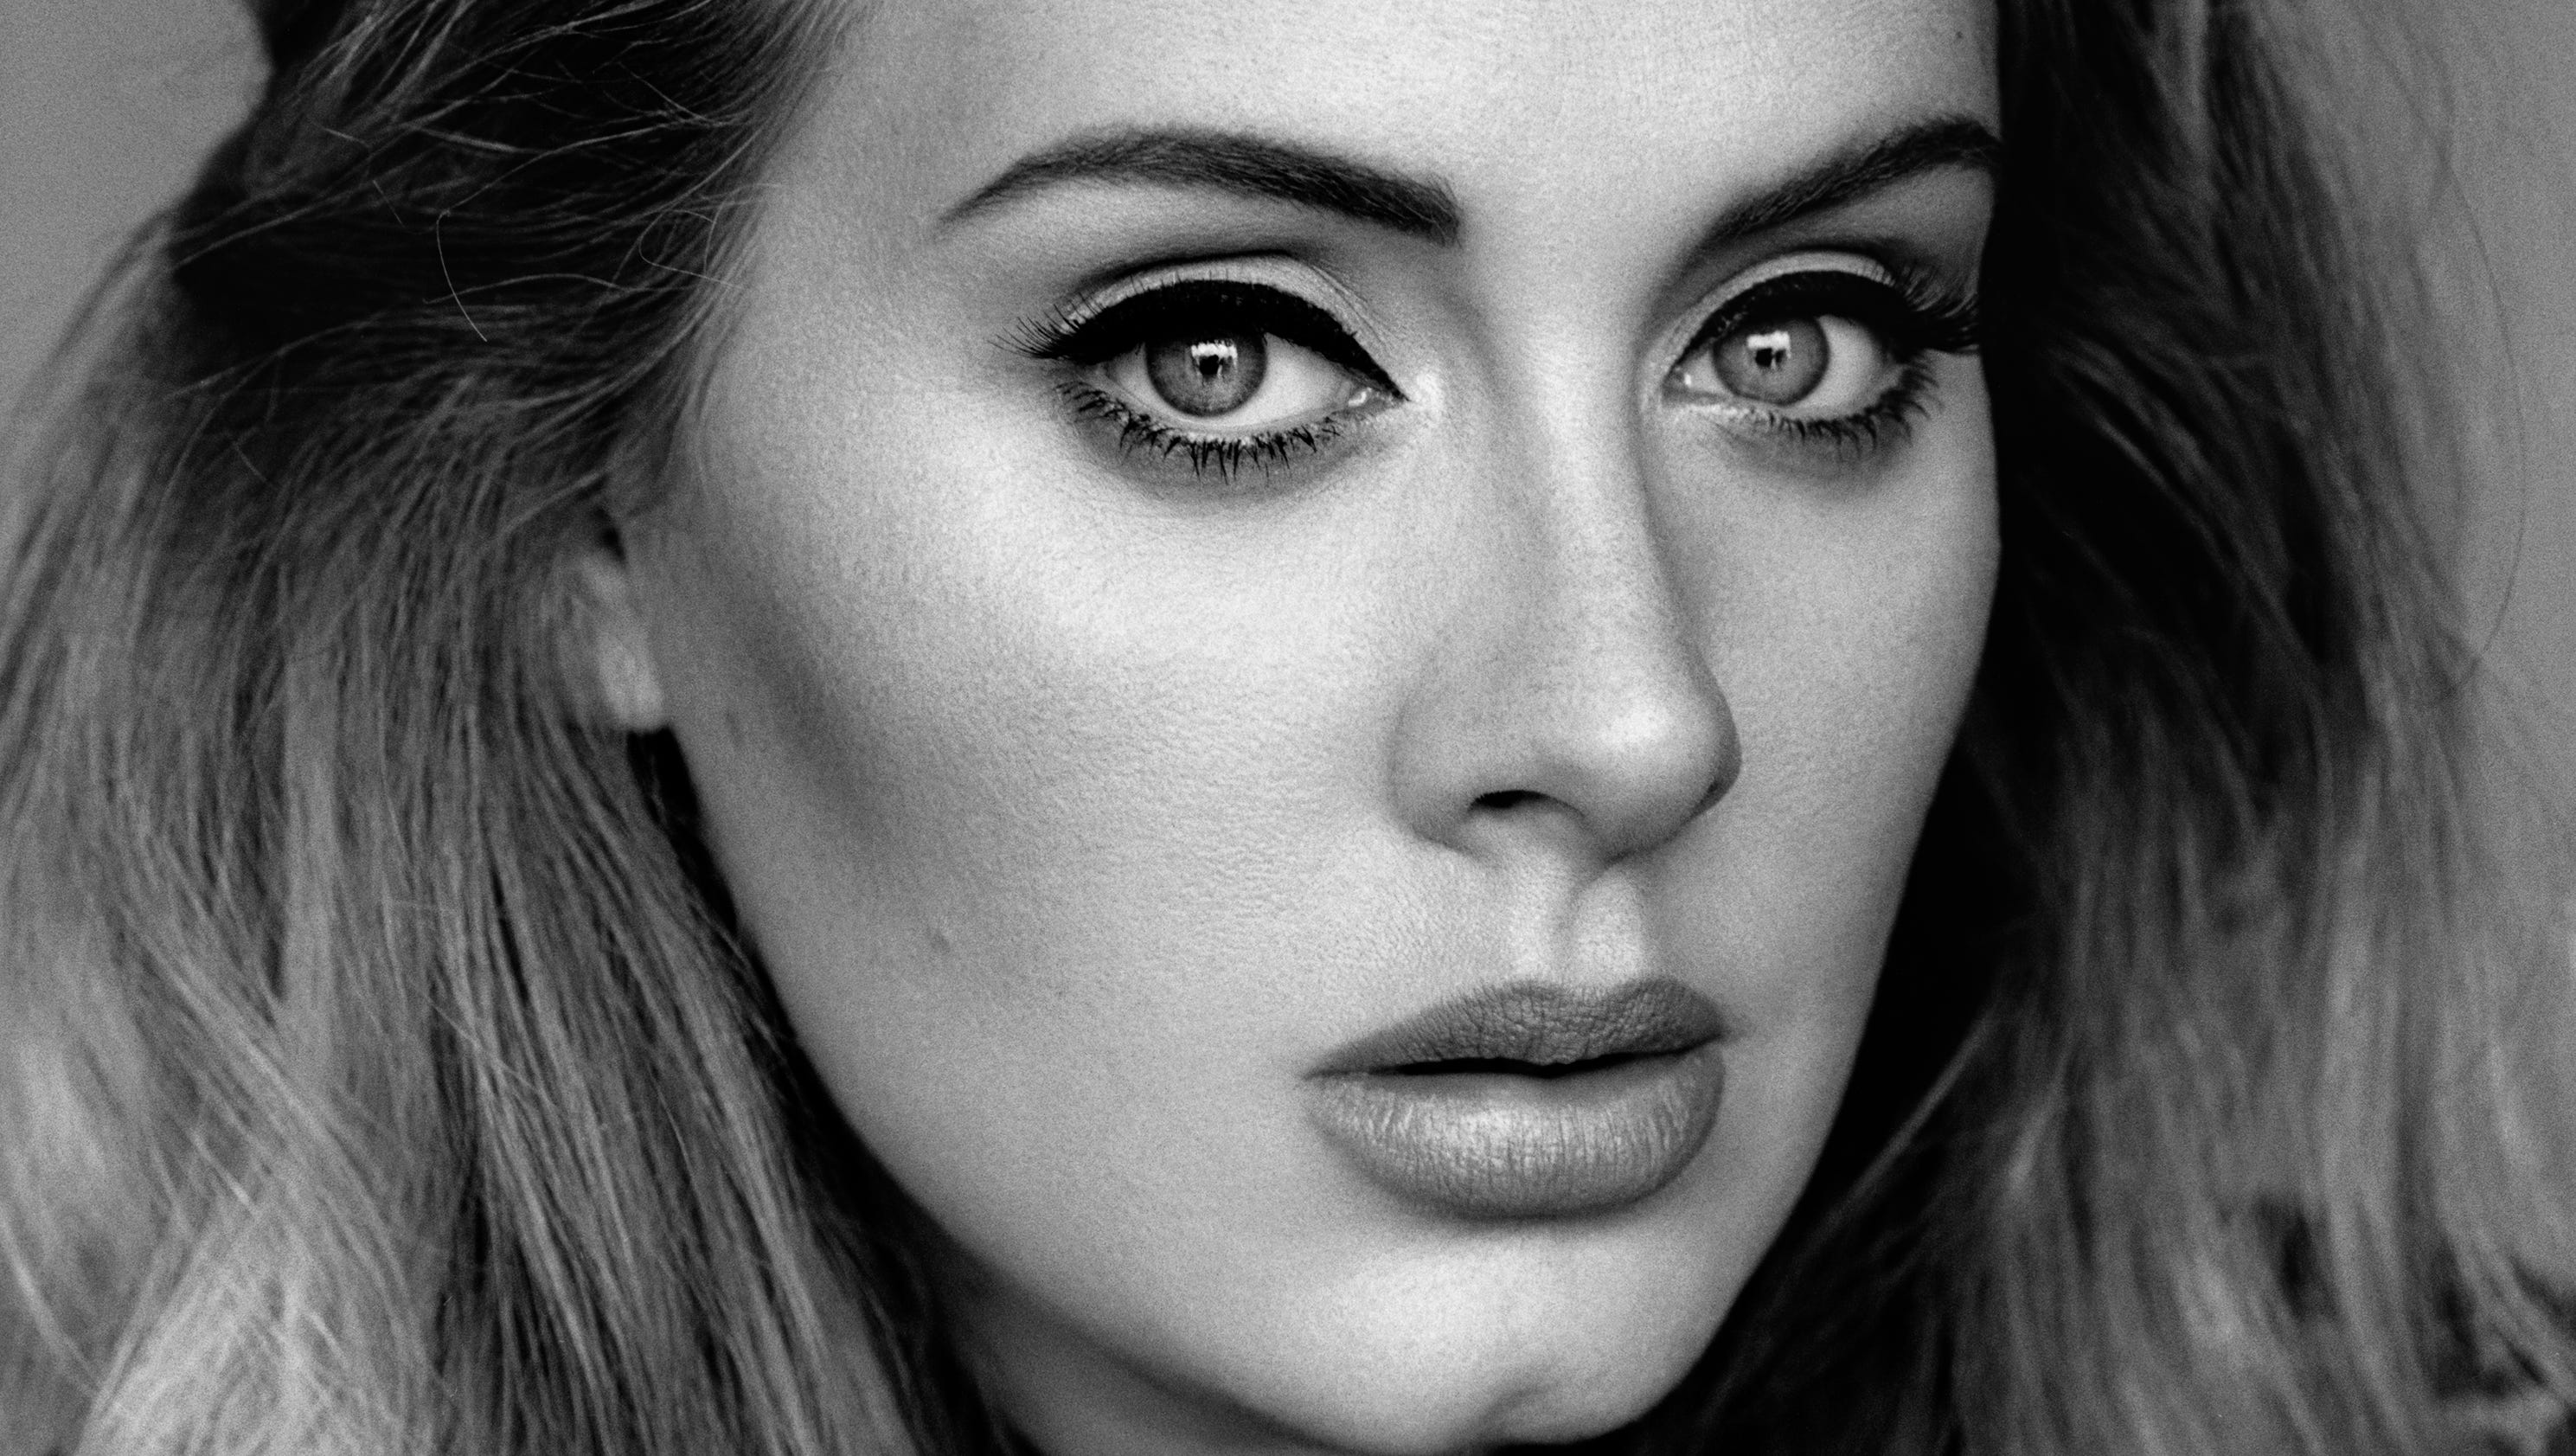 Adele channeled her 'early-life crisis' into long-awaited new album, '25'